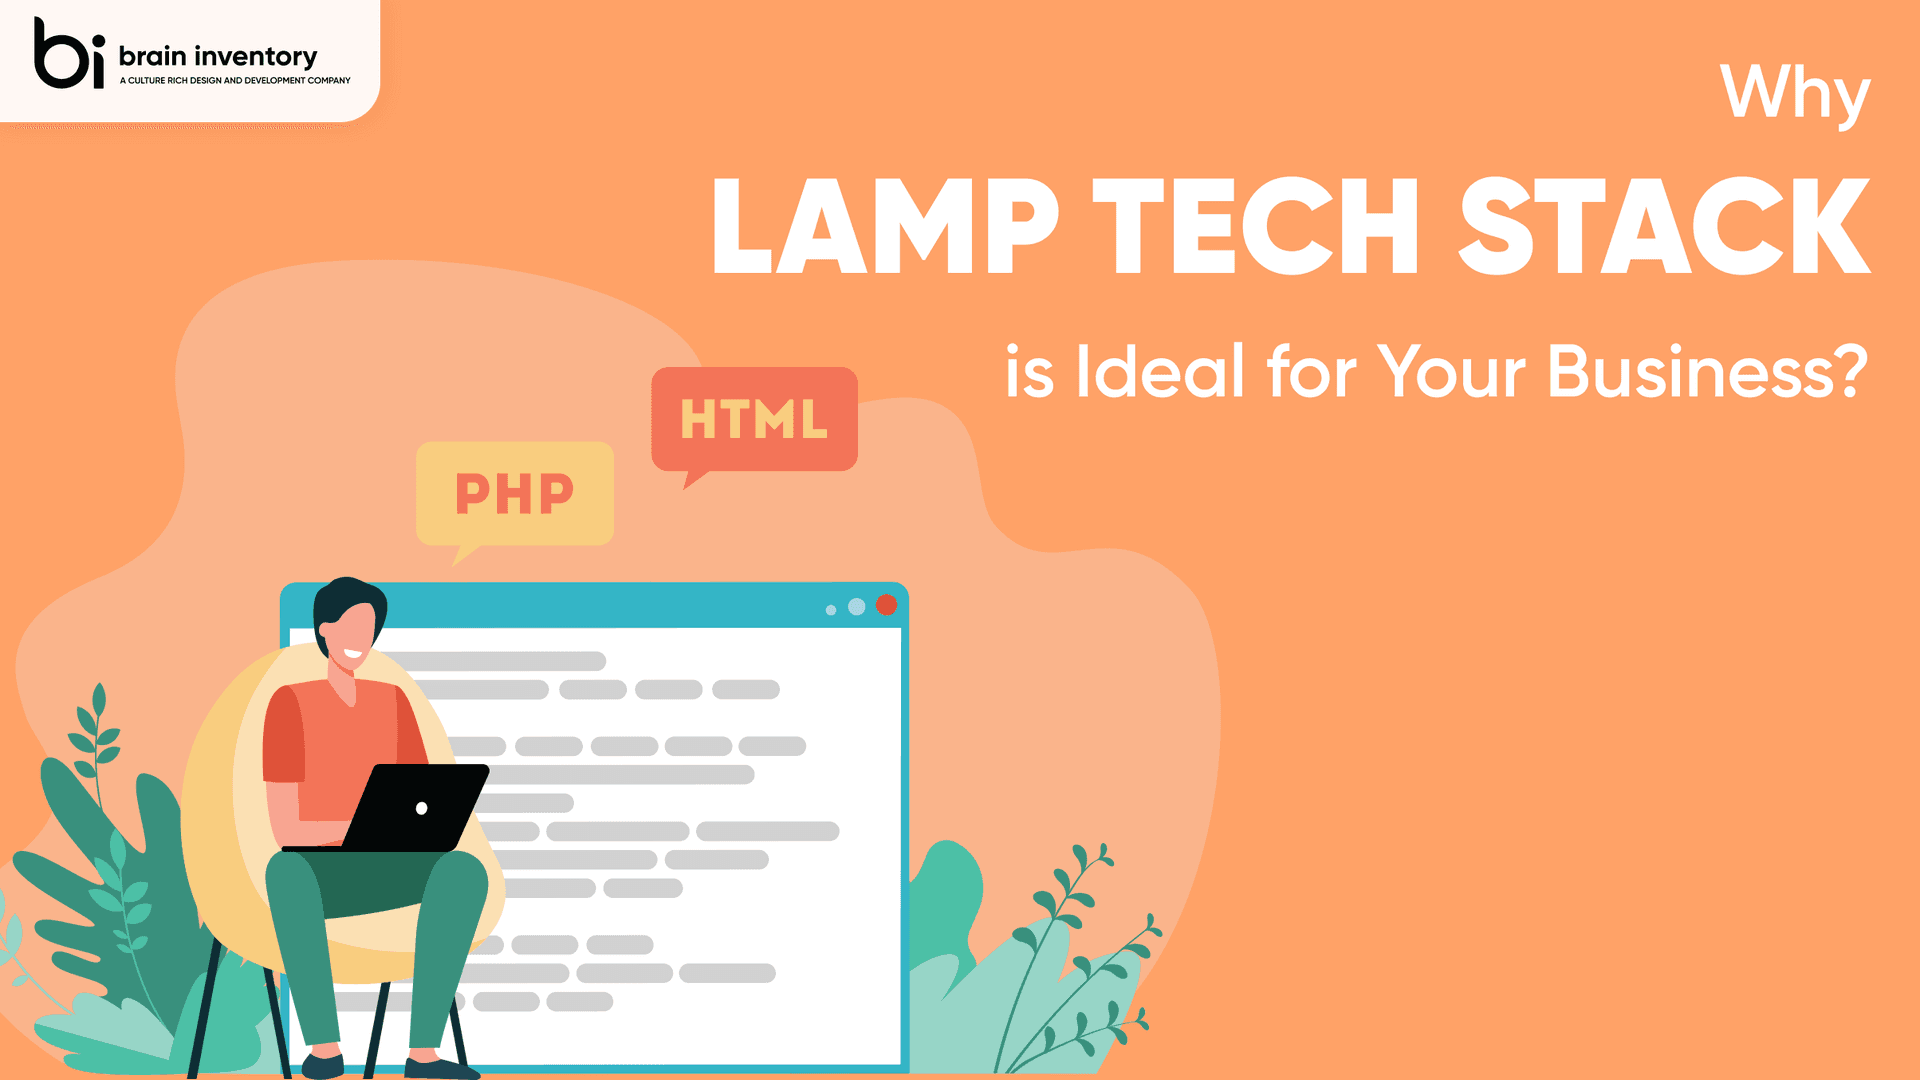 Why Lamp Tech Stack is Ideal for Your Business?